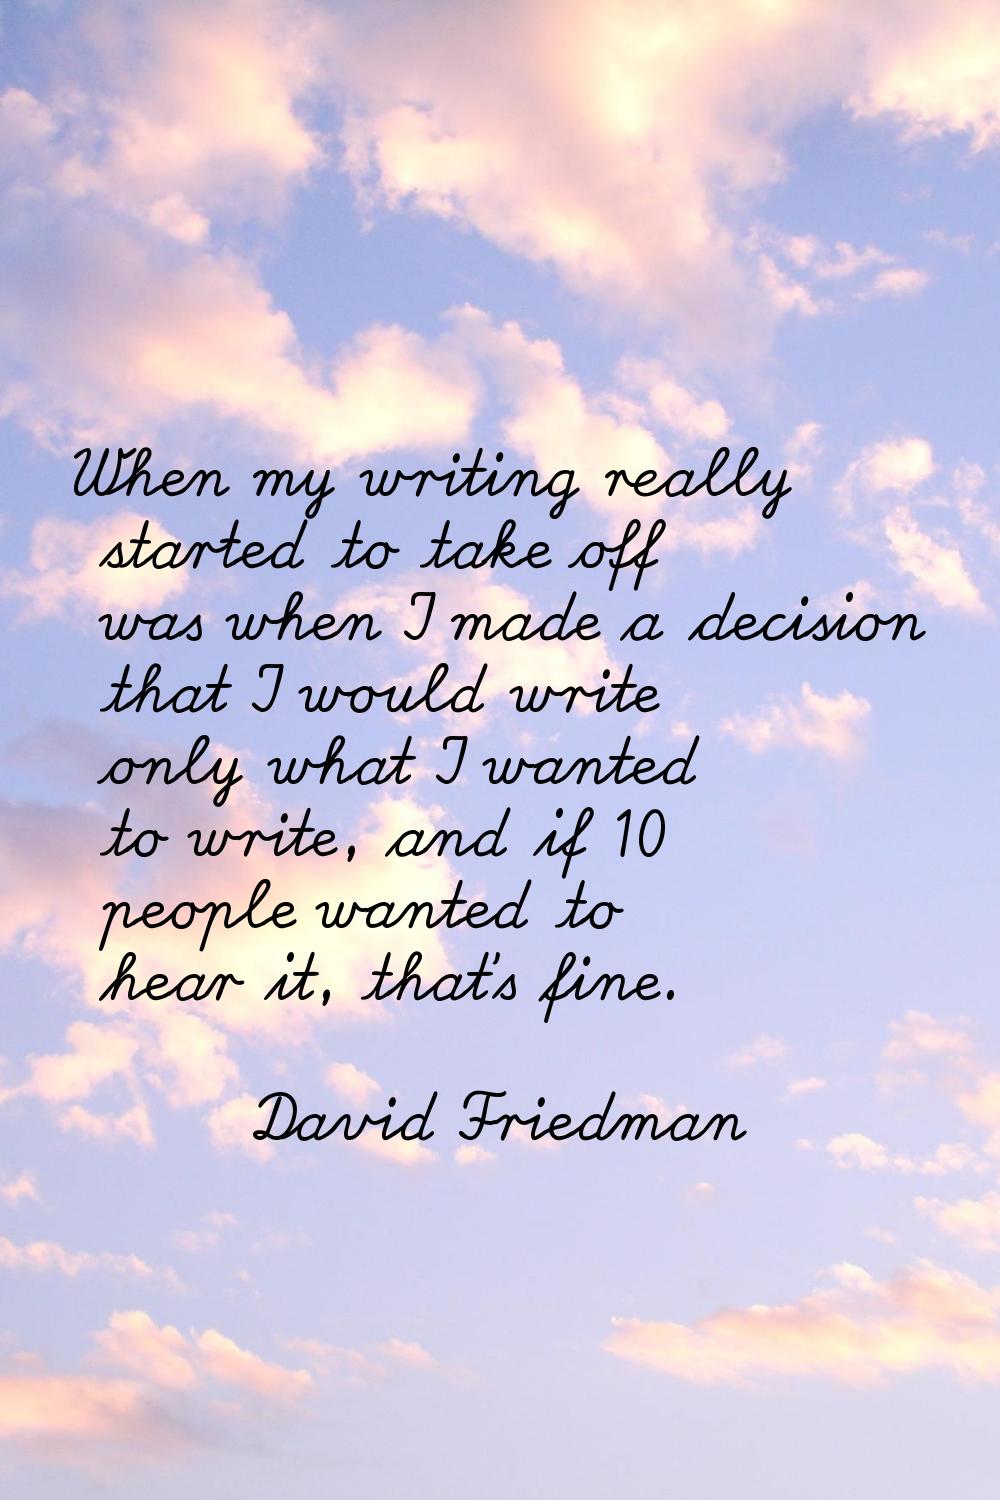 When my writing really started to take off was when I made a decision that I would write only what 